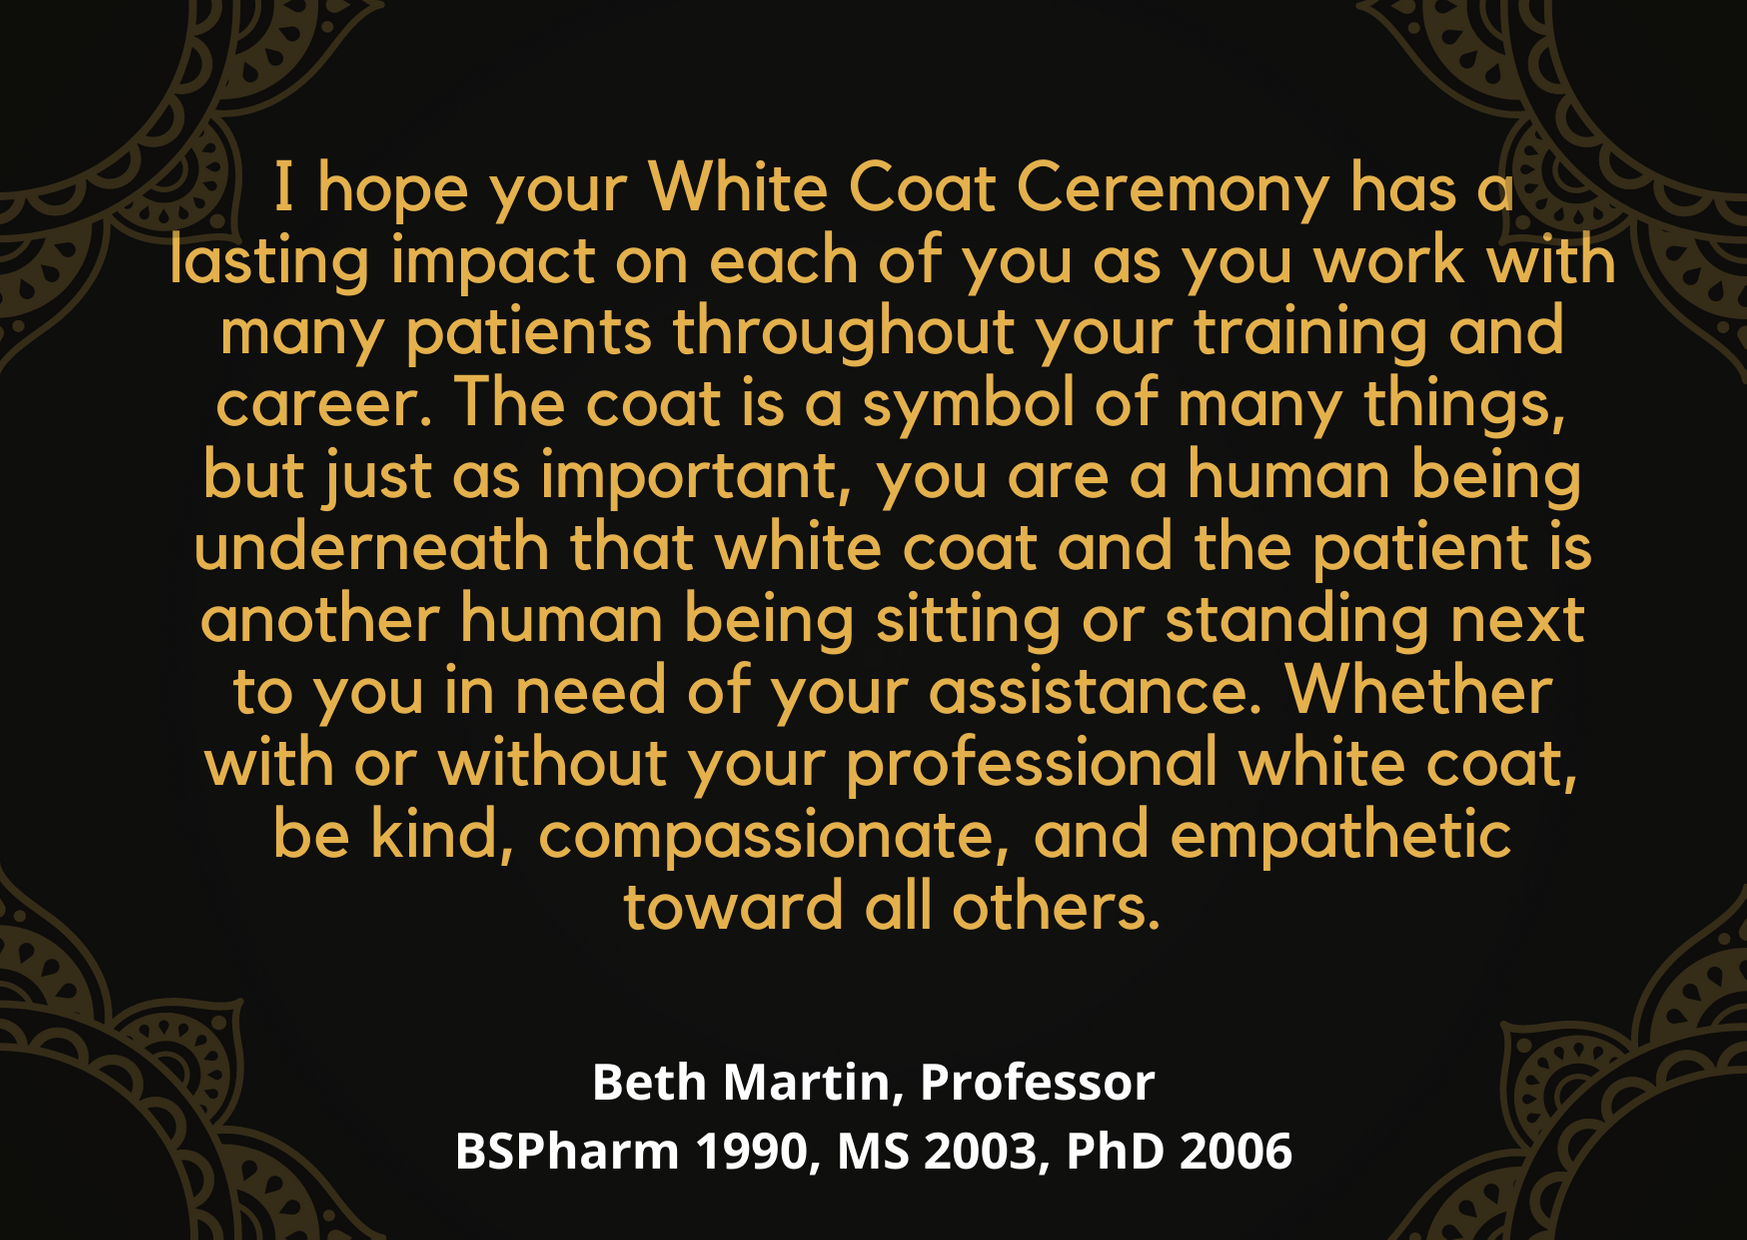 Beth Martin note for White Coat ceremony: "I hope your White Coat Ceremony has a lasting impact on each of you as you work with many patients throughout your training and career. The coat is a symbol of many things, but just as important, you are a human being underneath that white coat and the patient is another human being si8tting or standing next to you in need of your assistance. Whether with or without your professional white coat, be kind, compassionate, and empathetic toward all others."